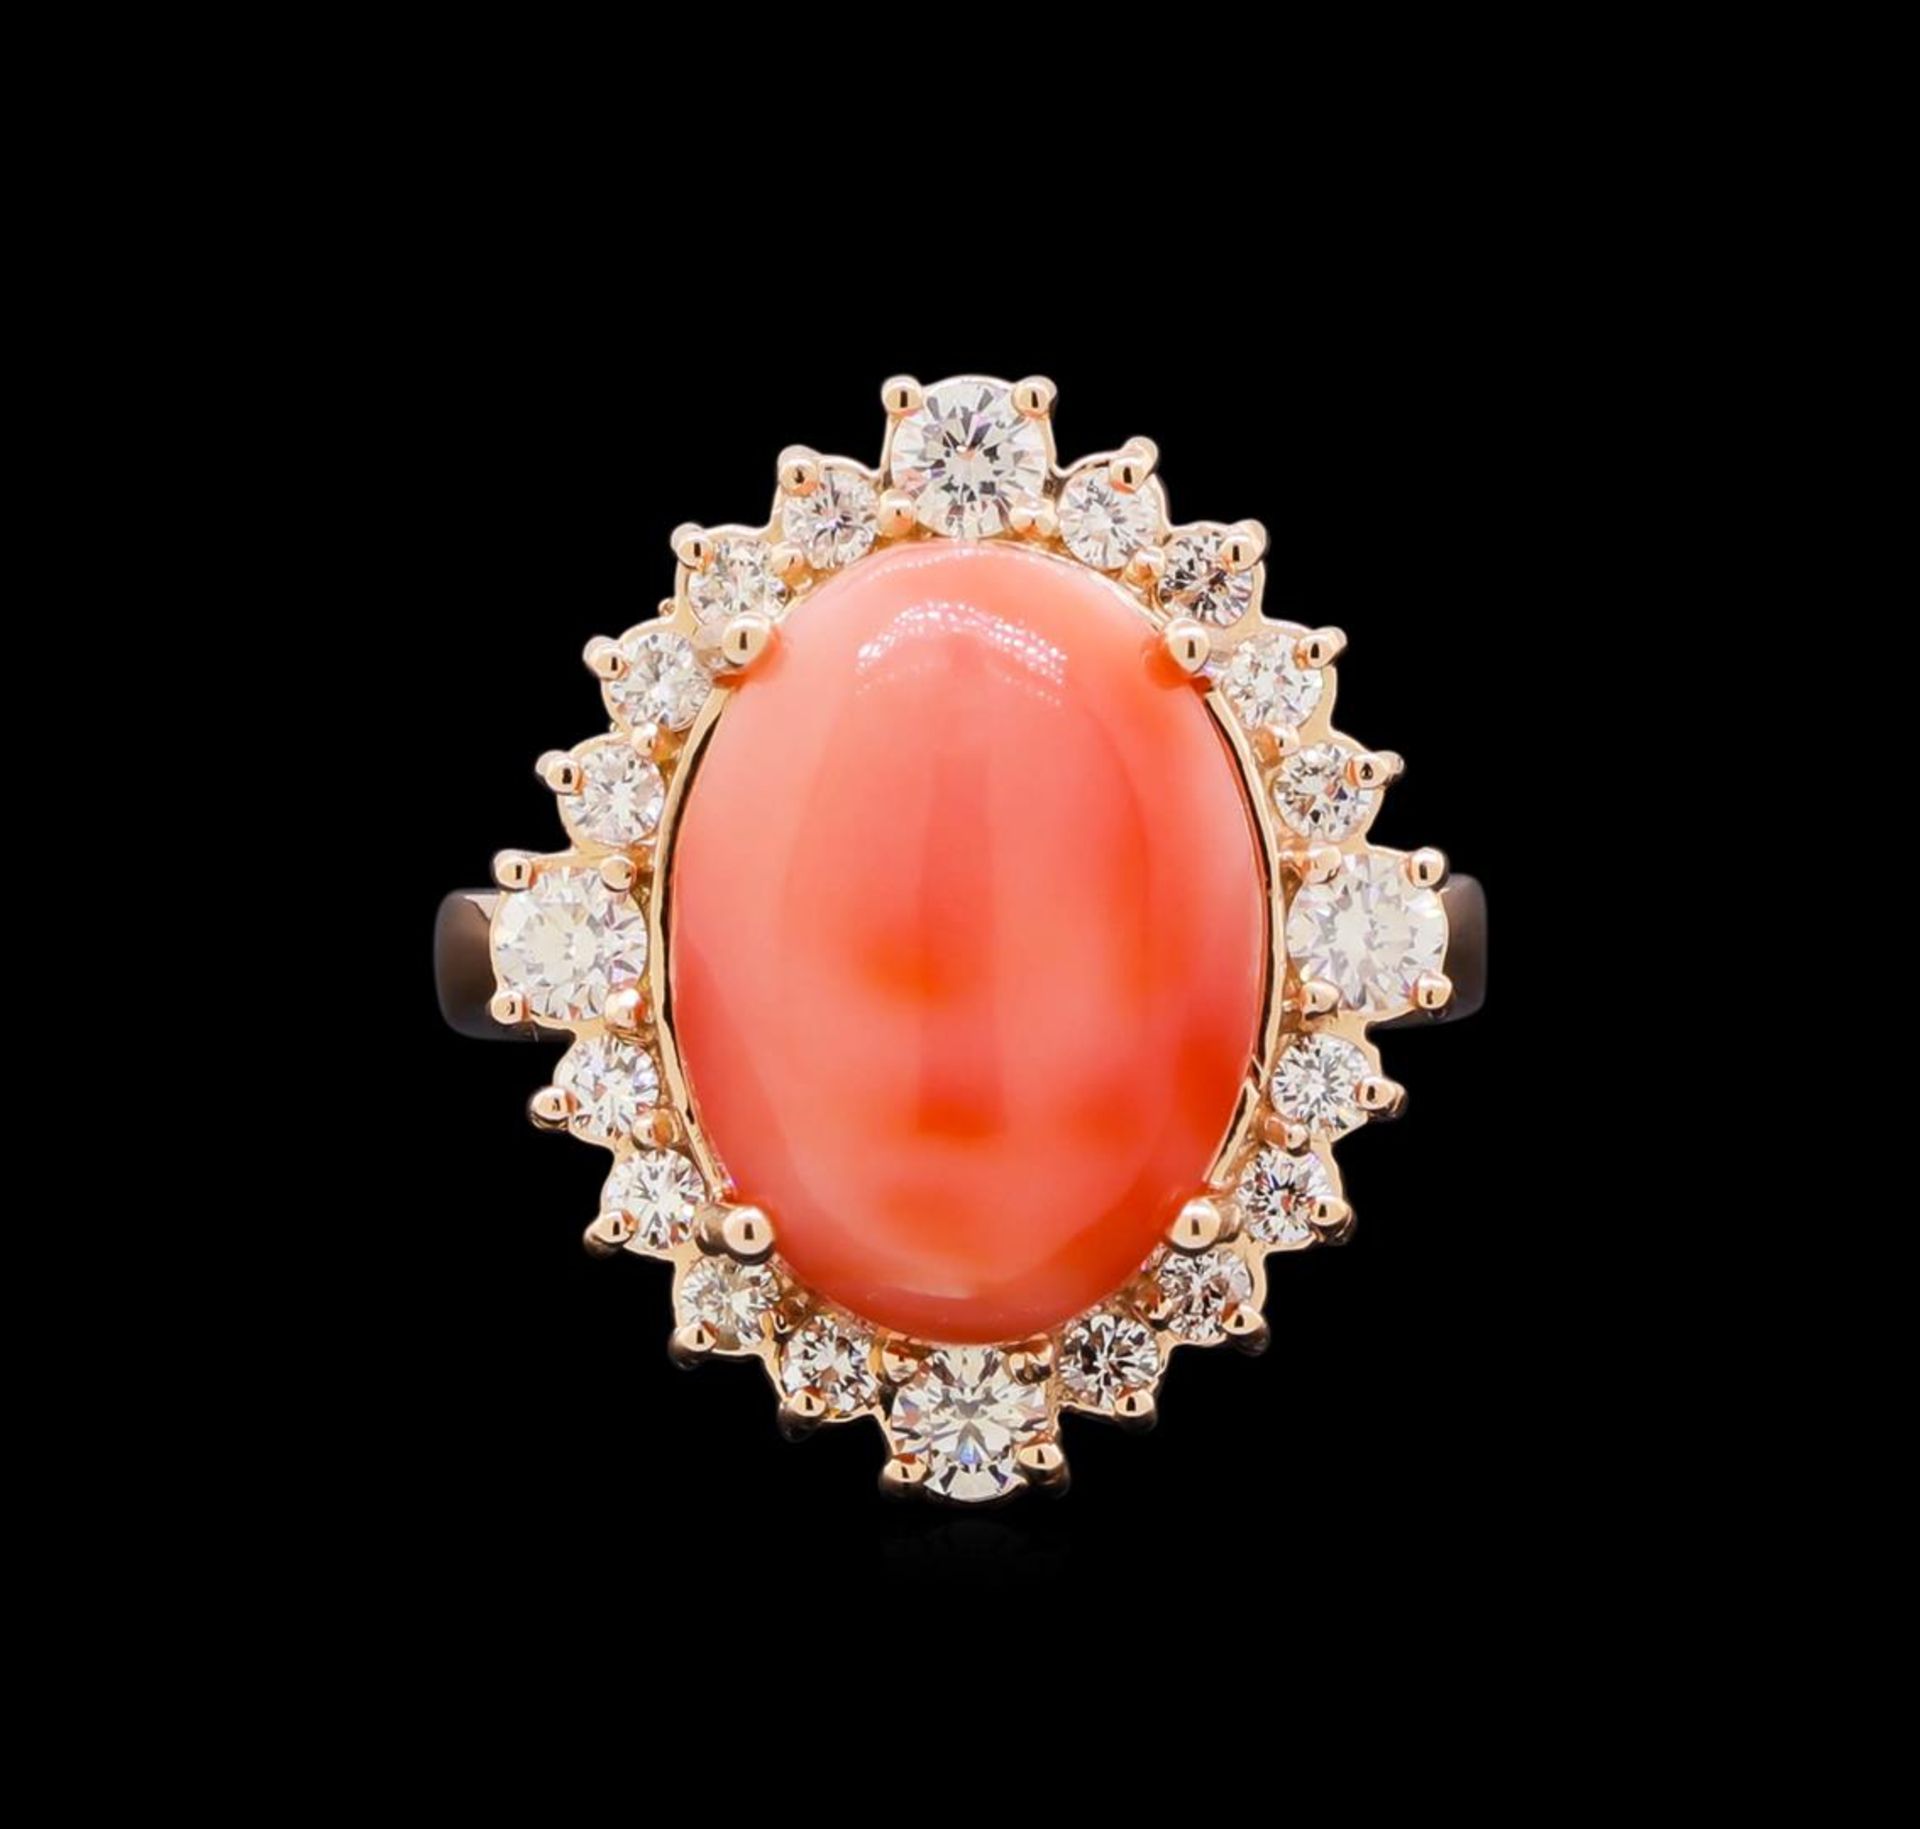 8.10 ctw Pink Coral and Diamond Ring - 14KT Rose Gold - Image 2 of 5